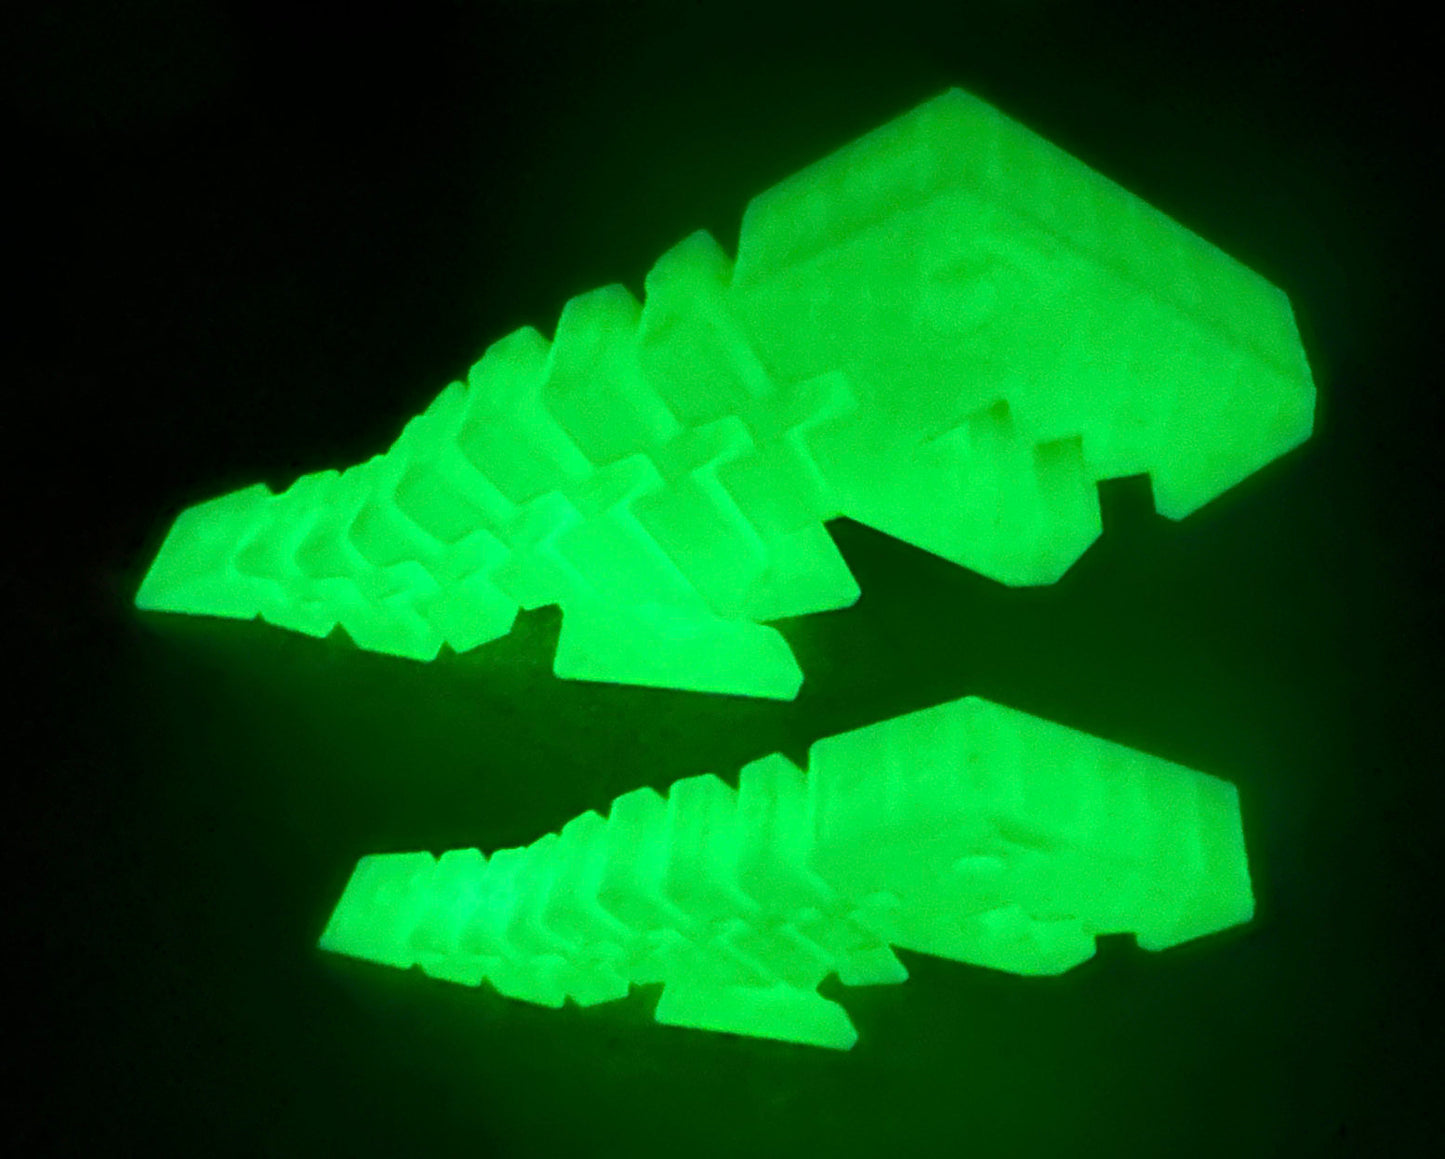 Flexi Rexi Glow in the Dark - TREX Fidget Toy - ADHD Autism Stim Sensory Toy - 3D Printed Articulated TREX toy